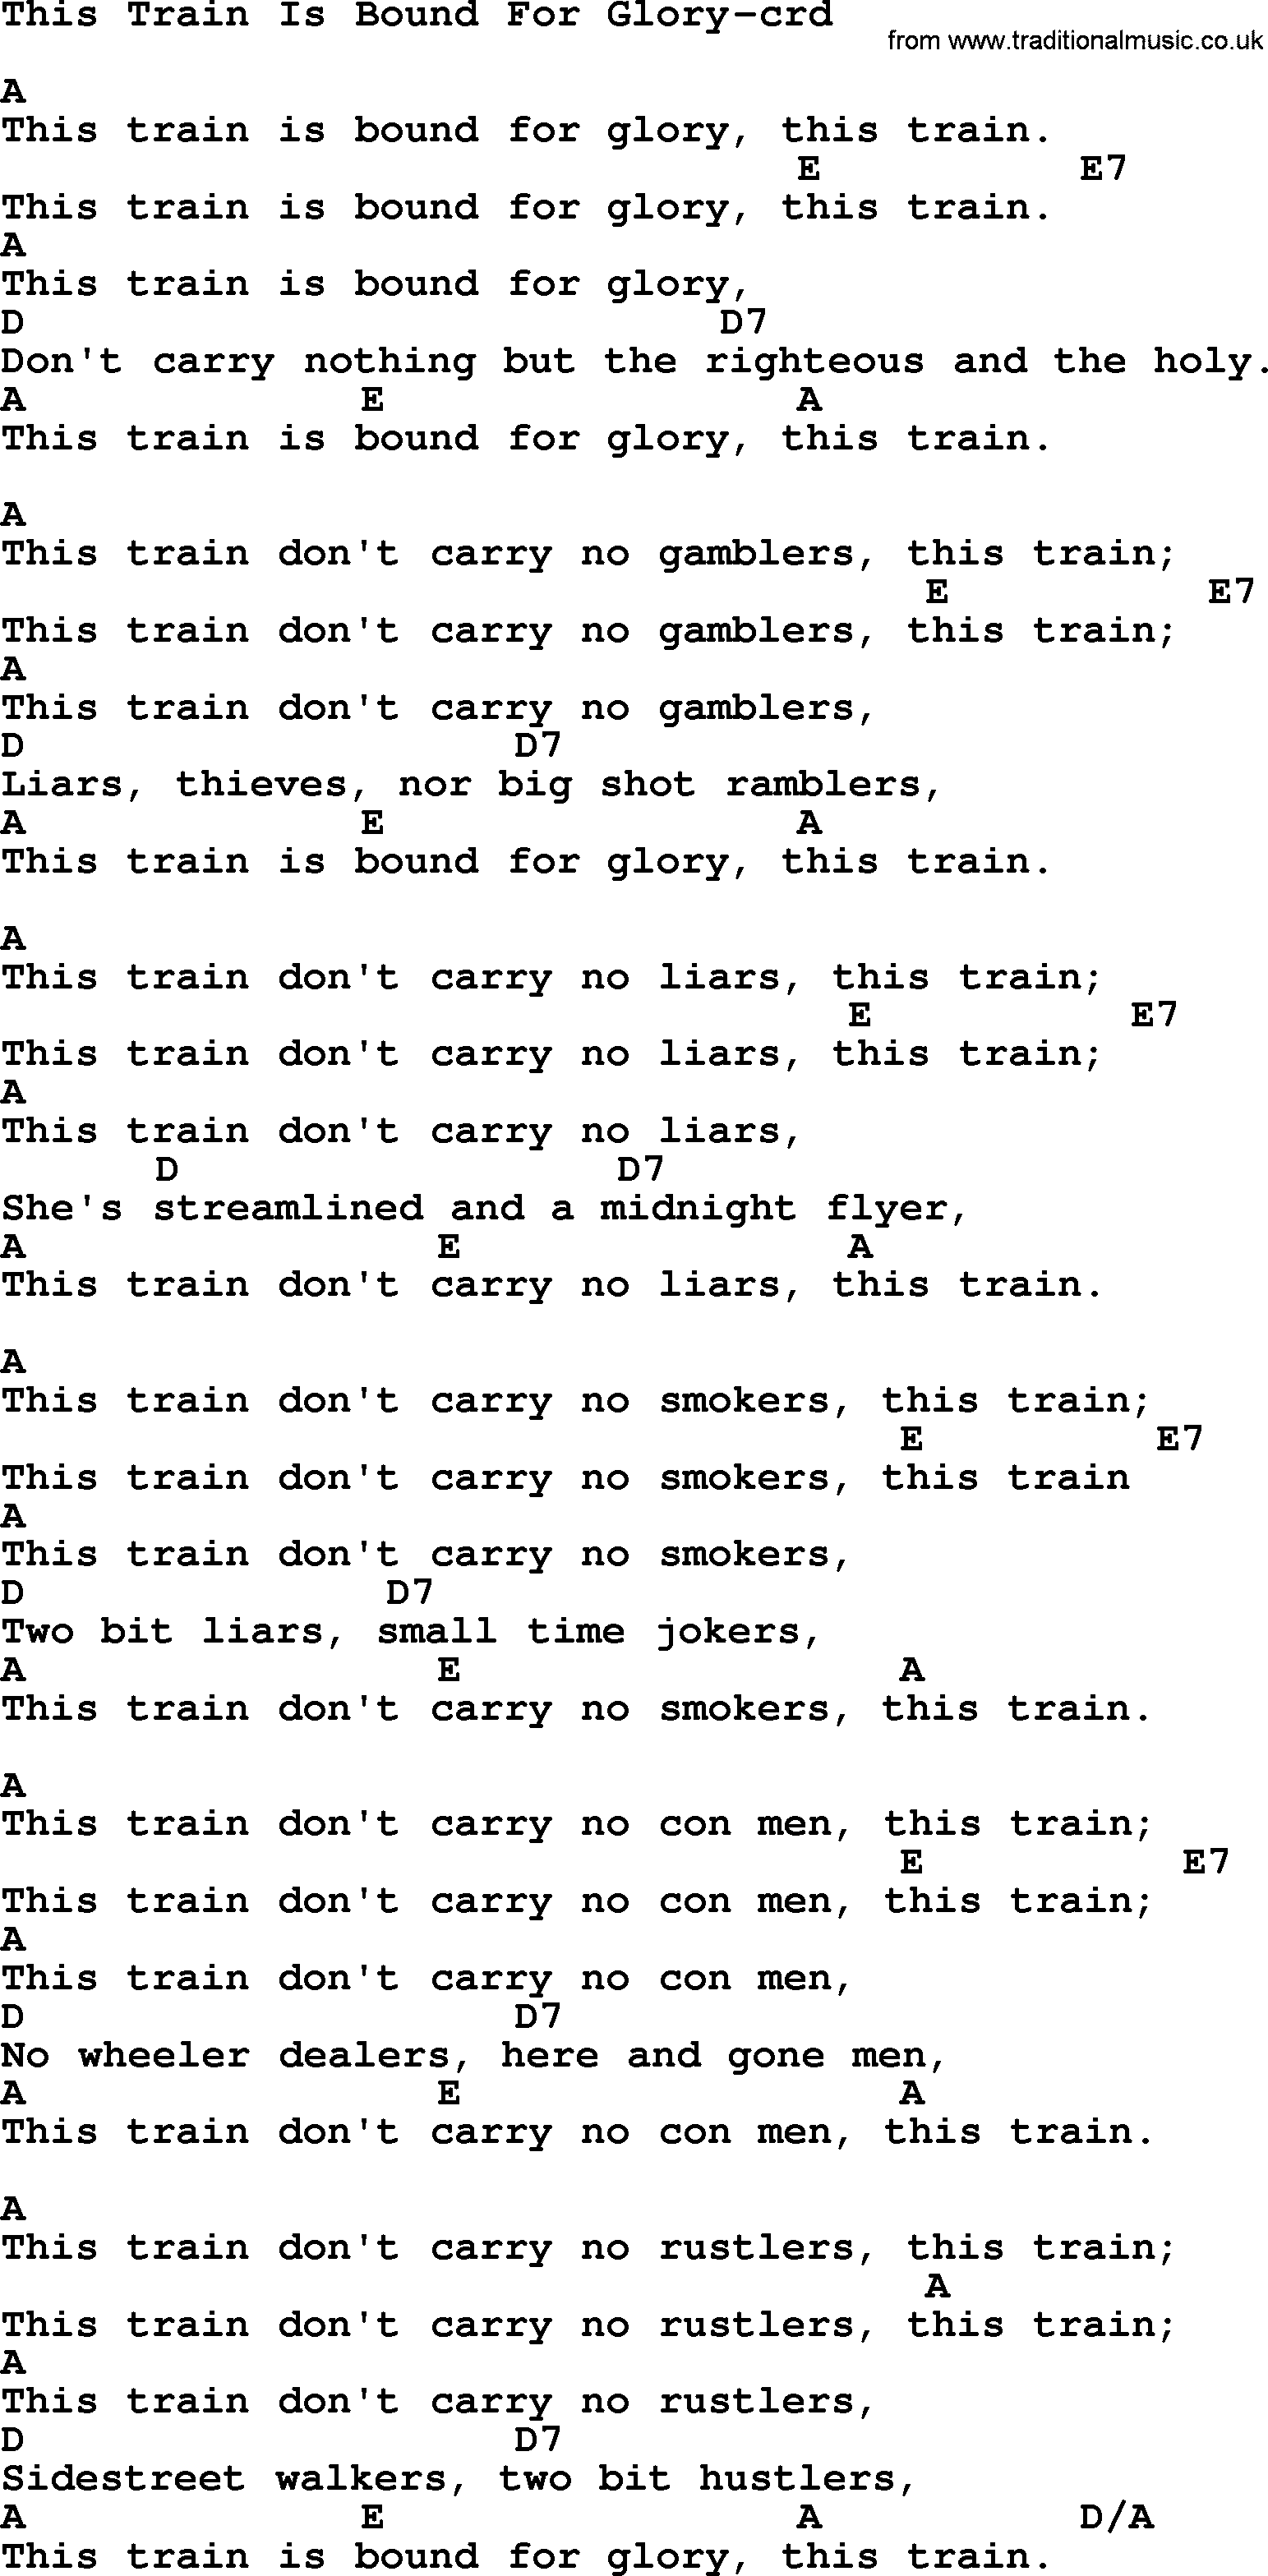 Woody Guthrie song This Train Is Bound For Glory lyrics and chords